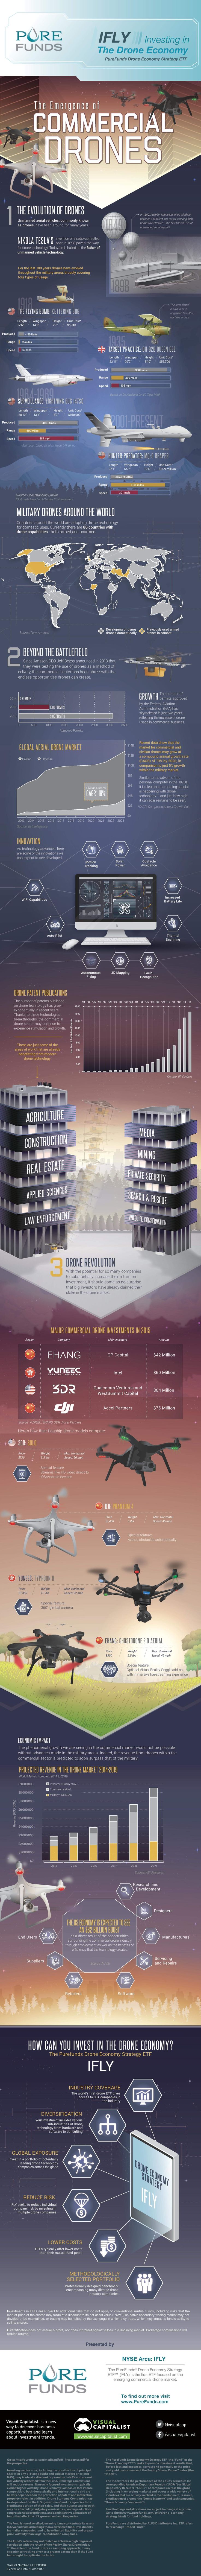 The Evolution Of Drones Infographic Tap the link for an awesome selection of dro...